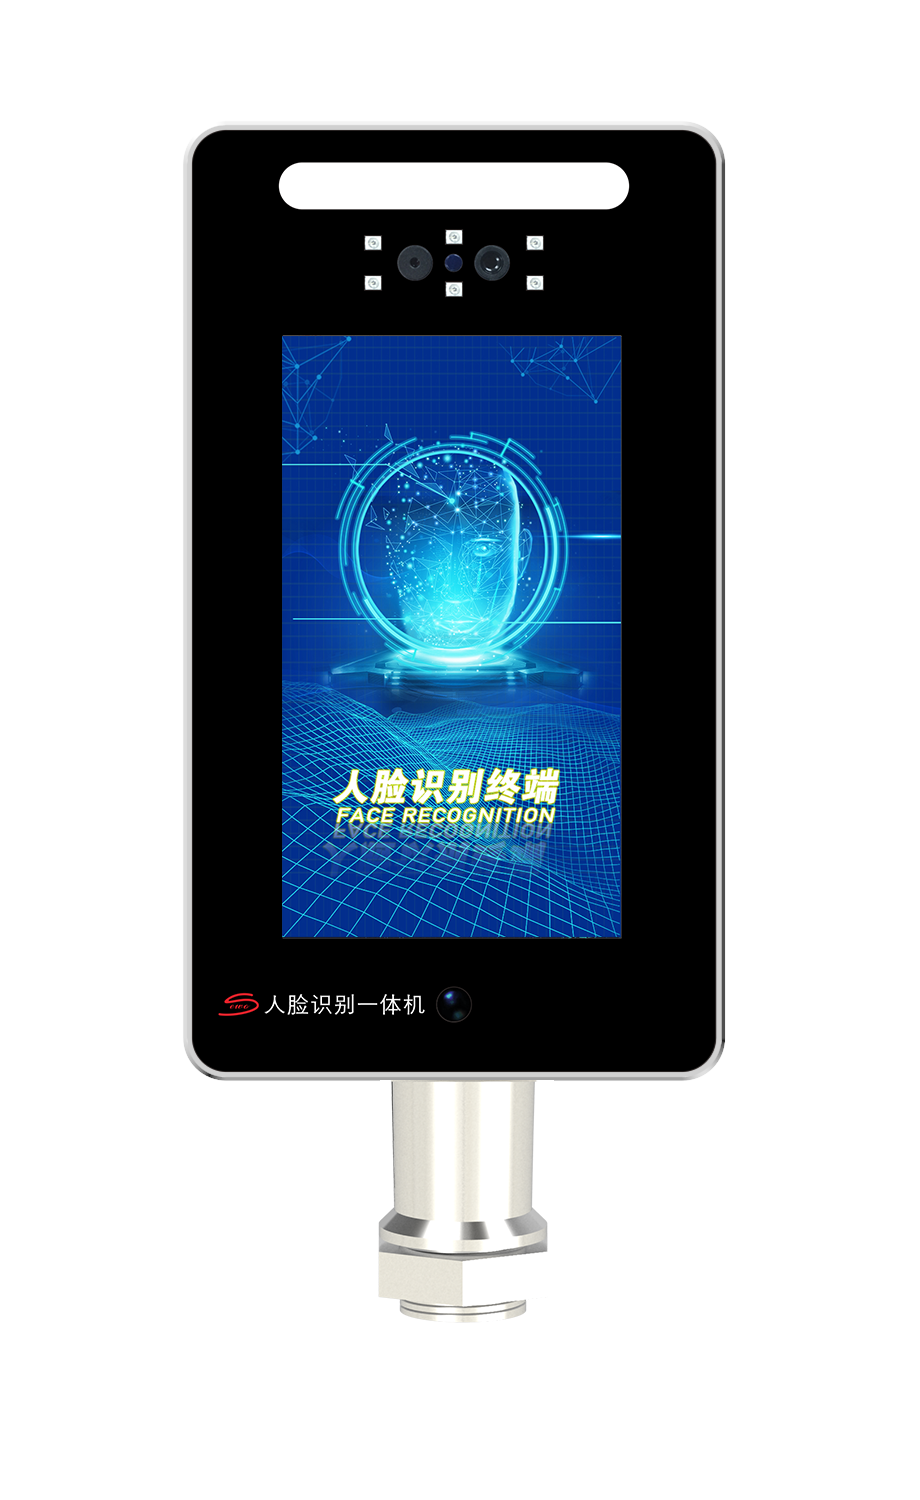 7 inch flat face recognition all-in-one machine